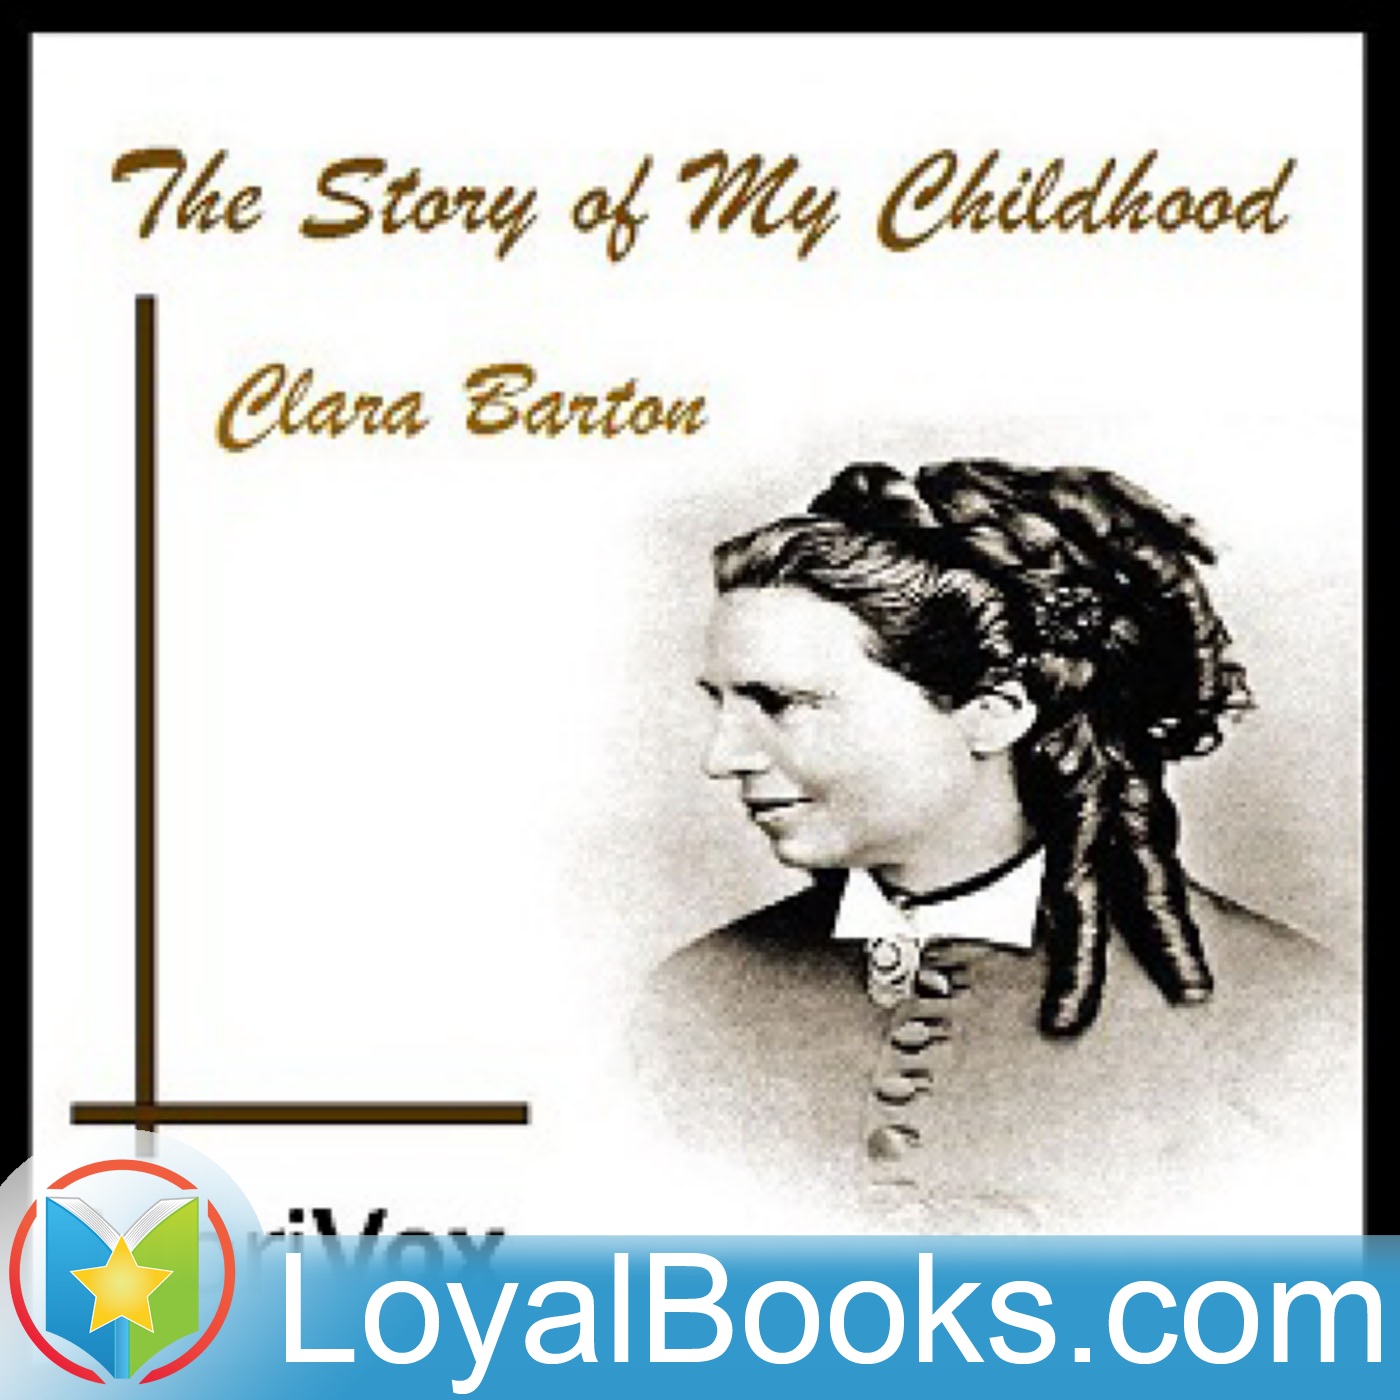 The Story of My Childhood by Clara Barton